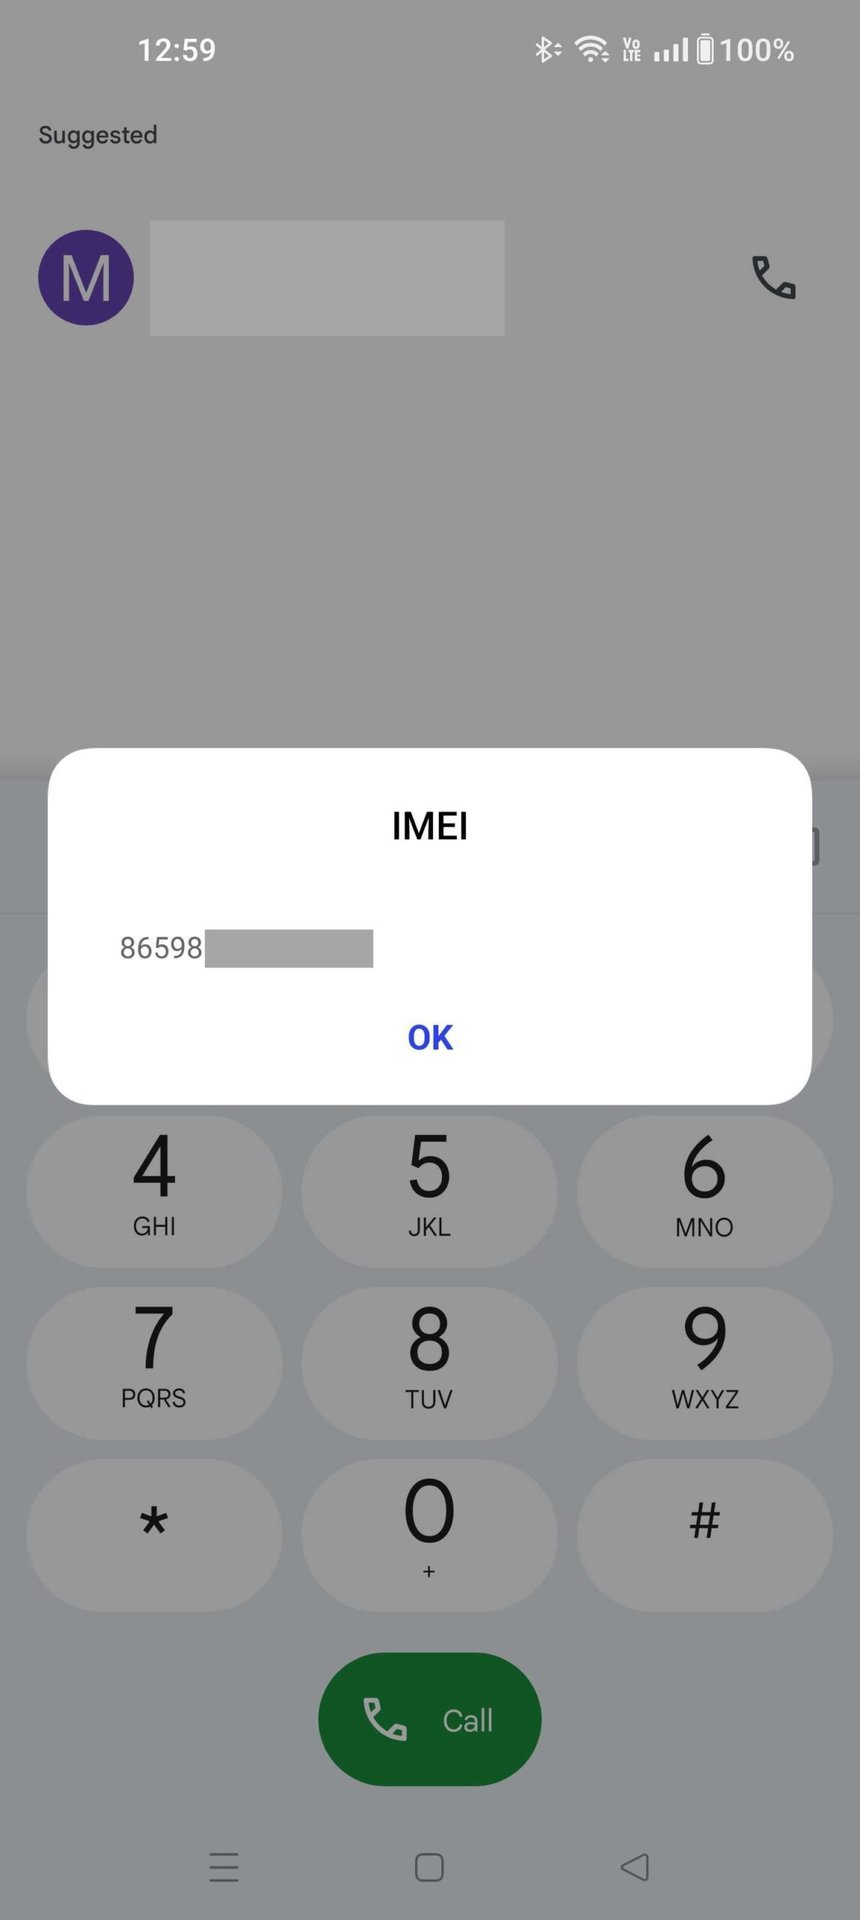 IMEI Number showing on Android Phone